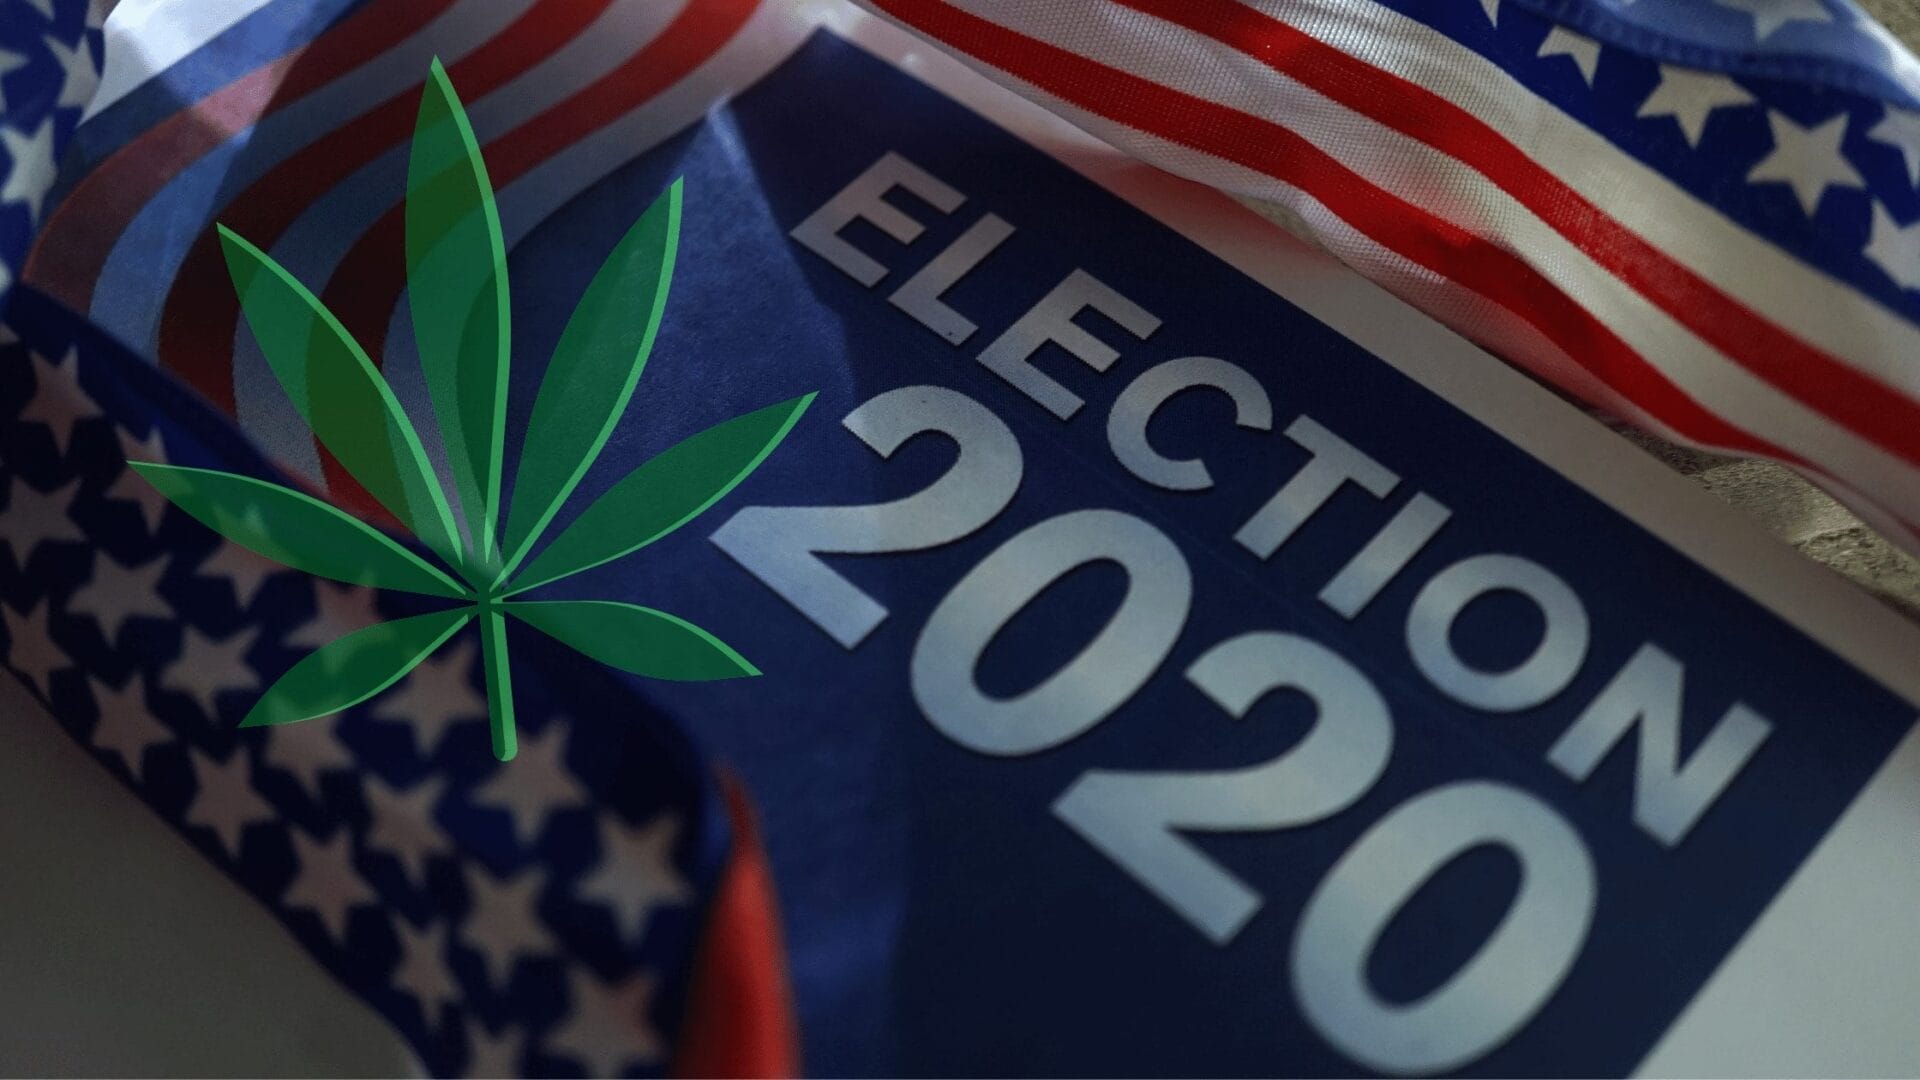 2020 Election Results about Marijuana